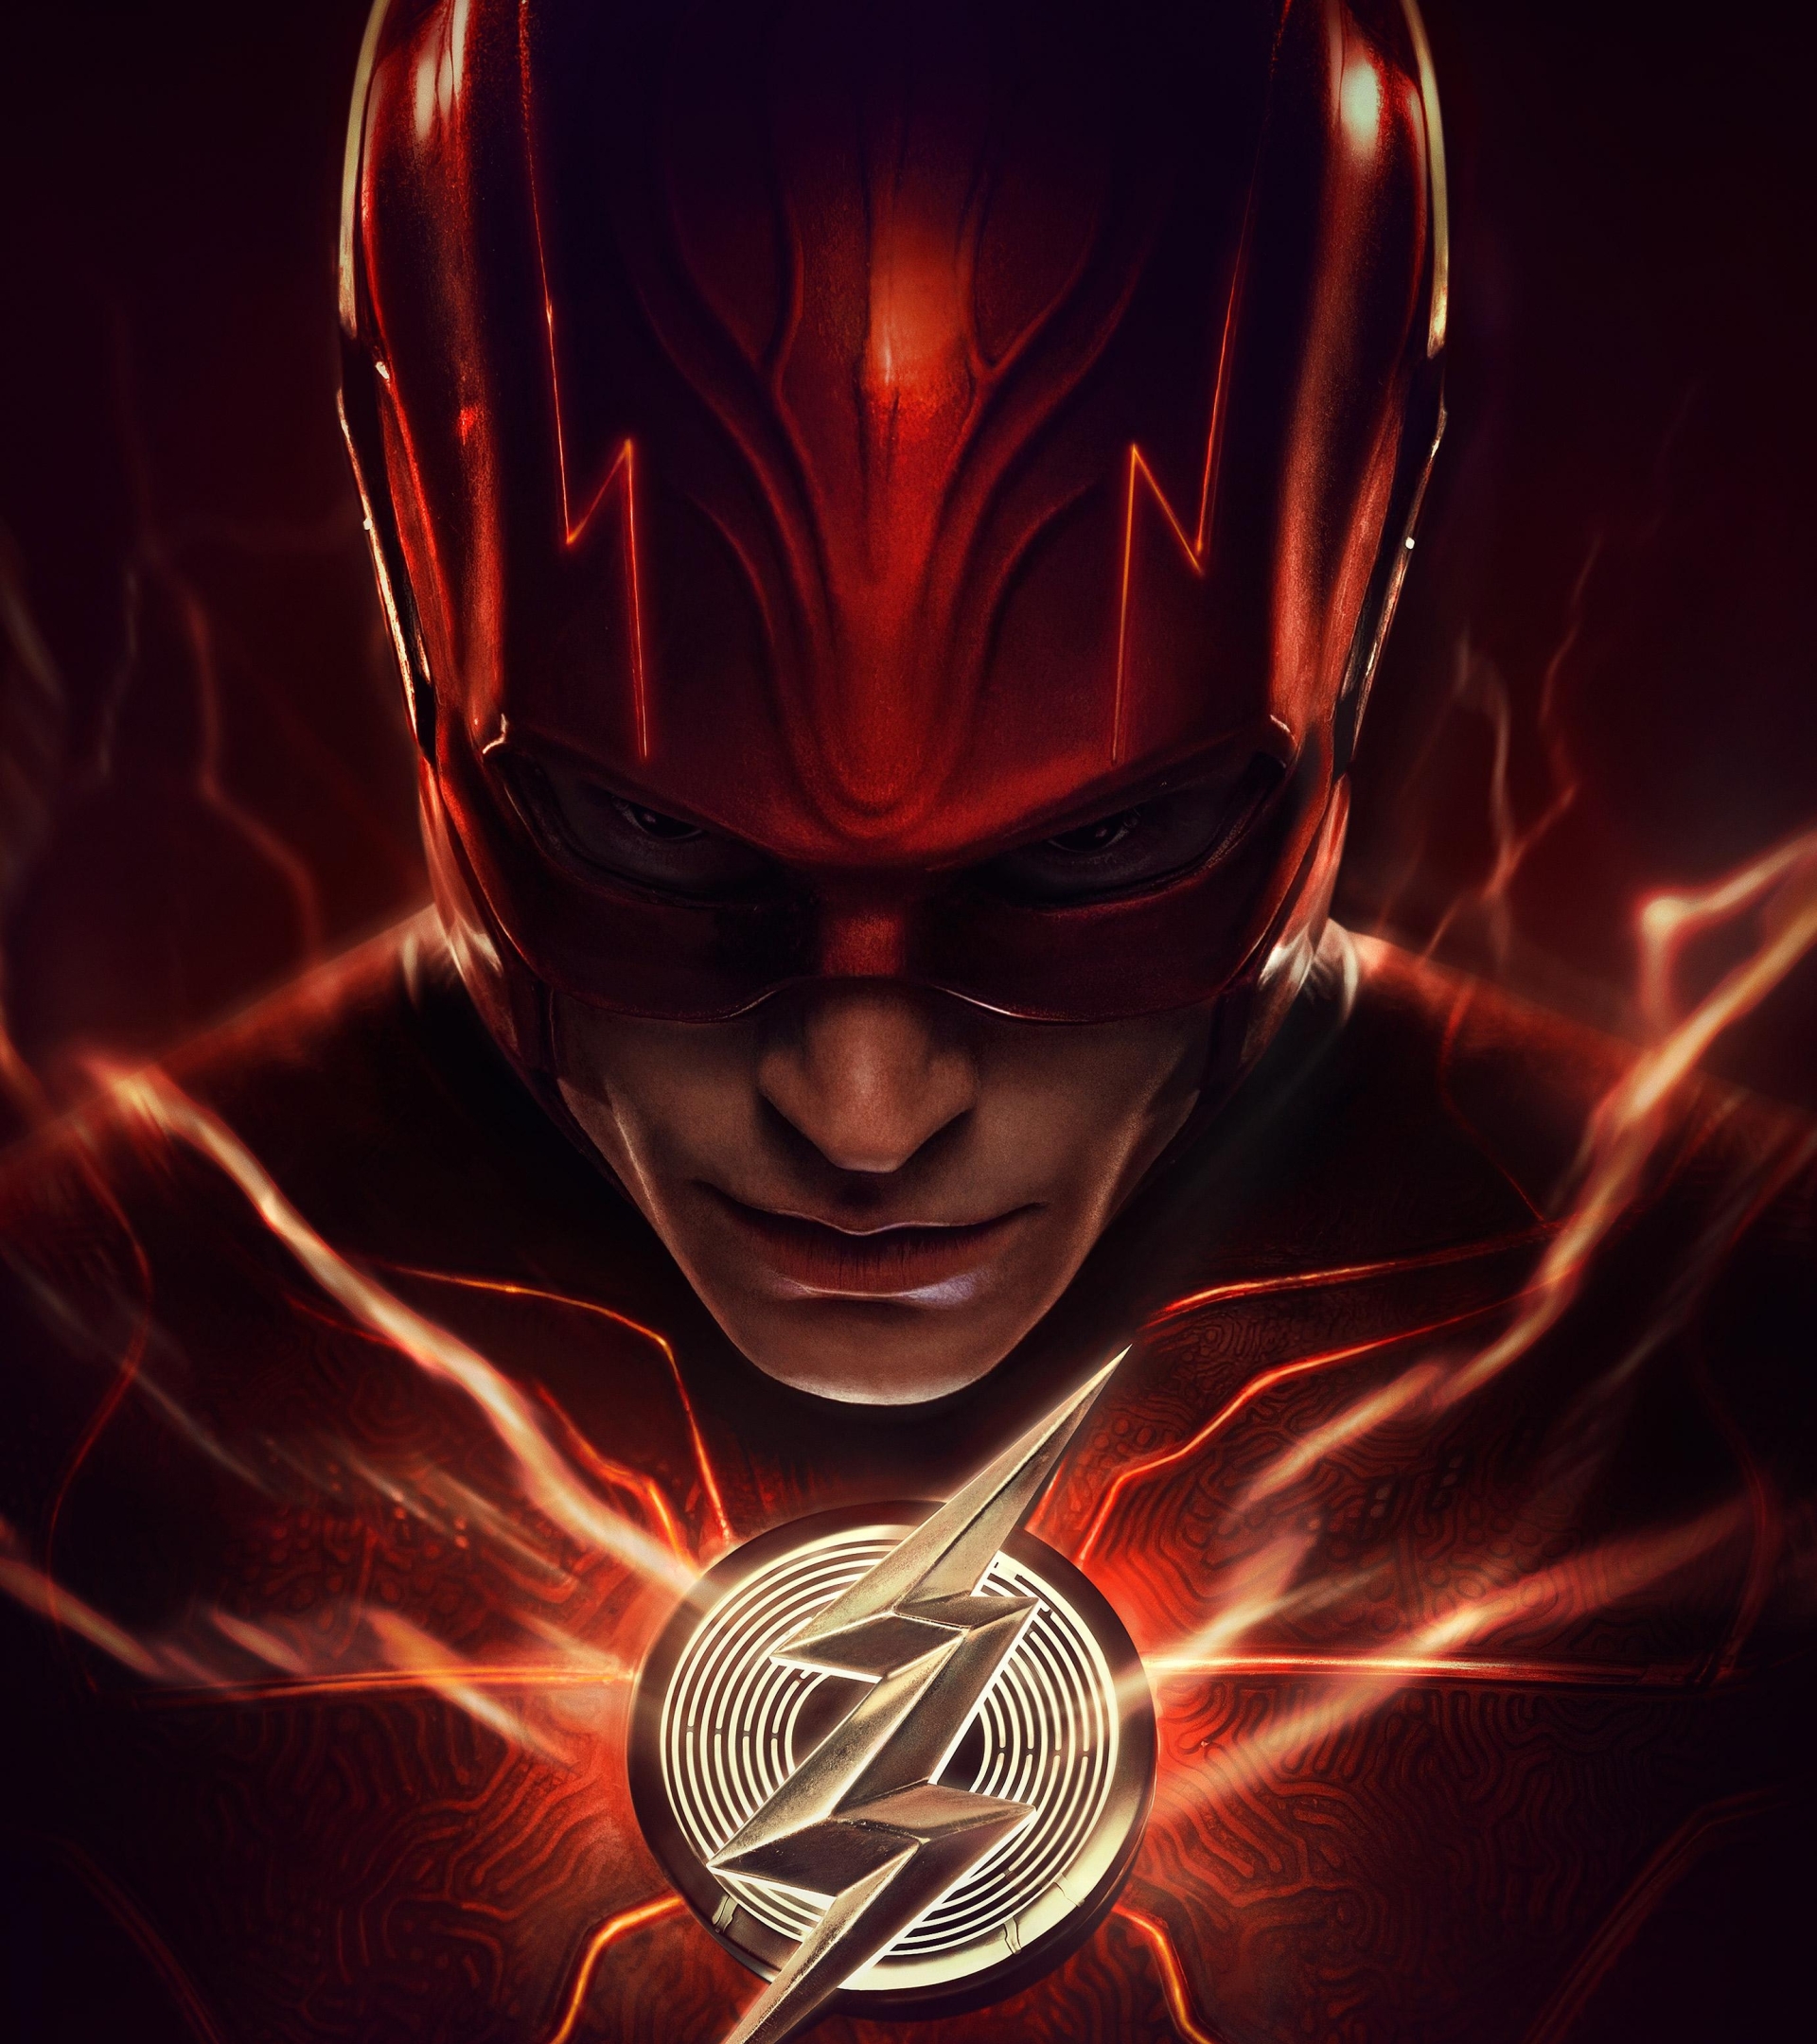 1920x2160 Poster of The Flash Movie 1920x2160 Resolution Wallpaper, HD